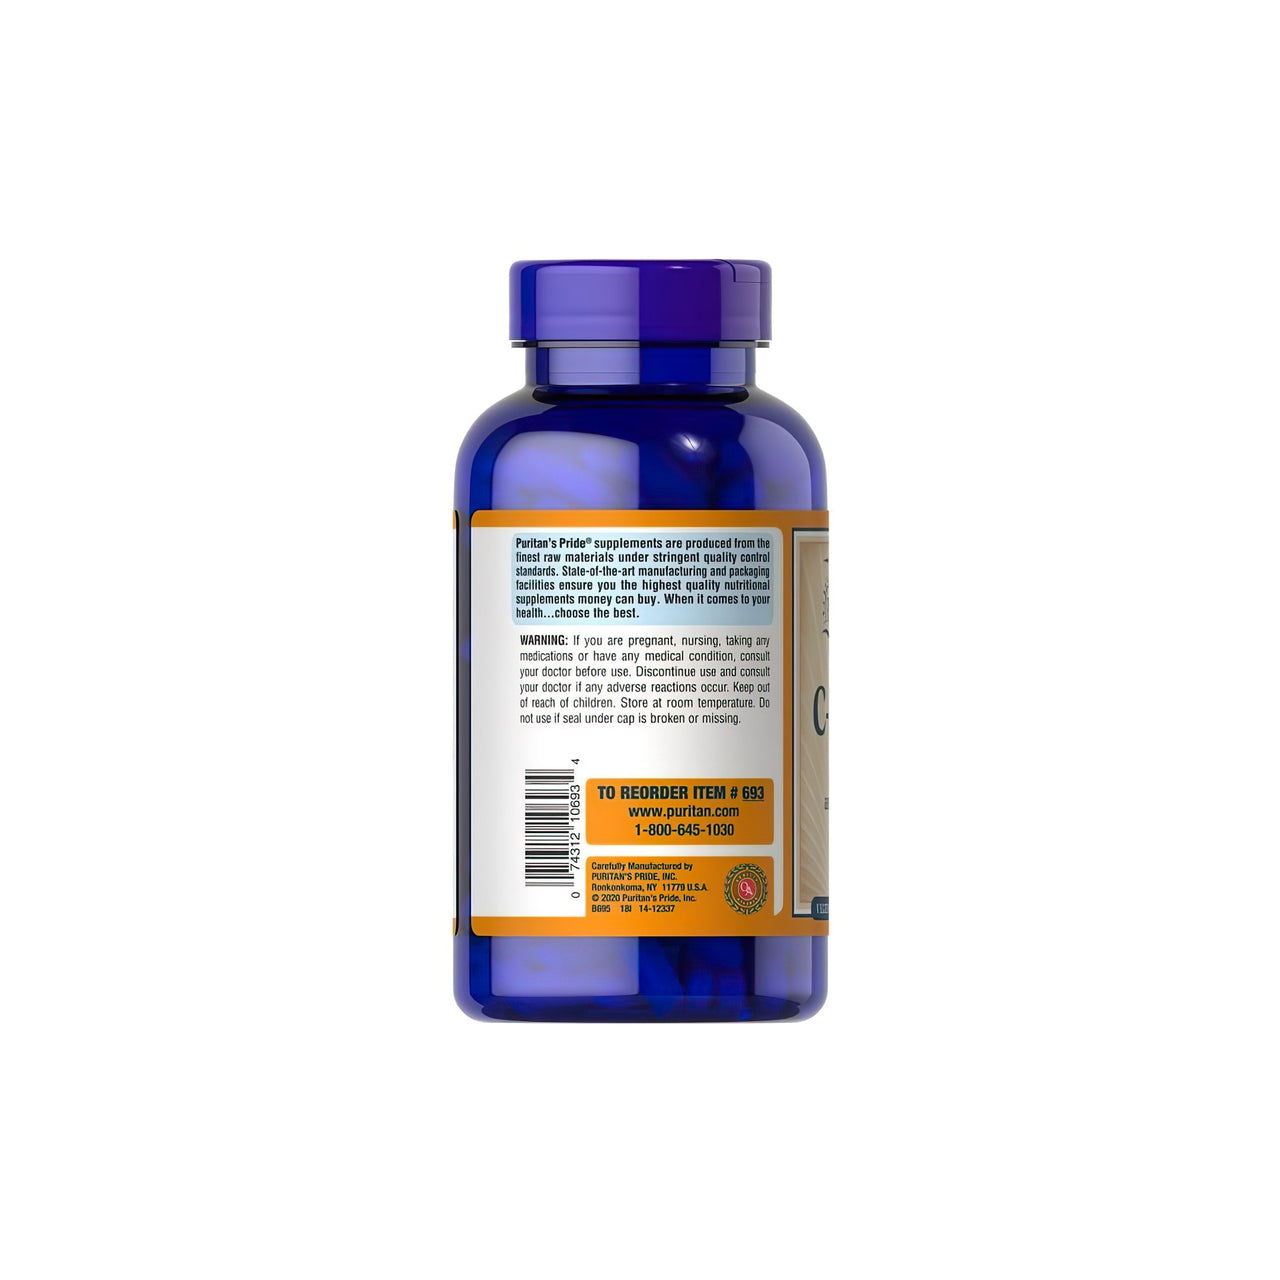 Vitamin C-1000 mg with Bioflavonoids & Rose Hips 250 Caplets